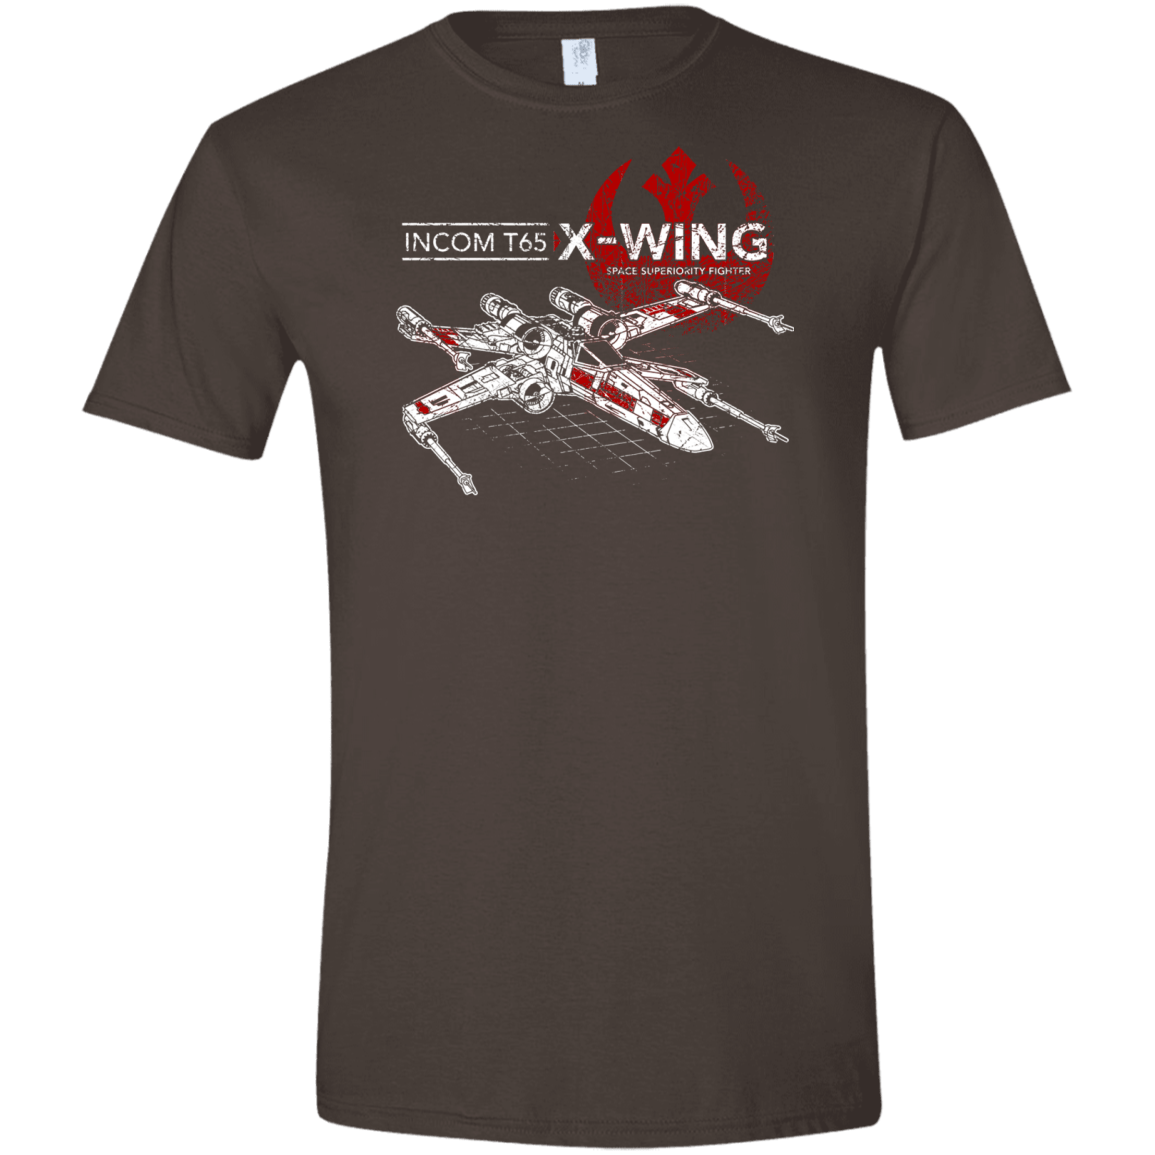 T-Shirts Dark Chocolate / S T-65 X-Wing Men's Semi-Fitted Softstyle